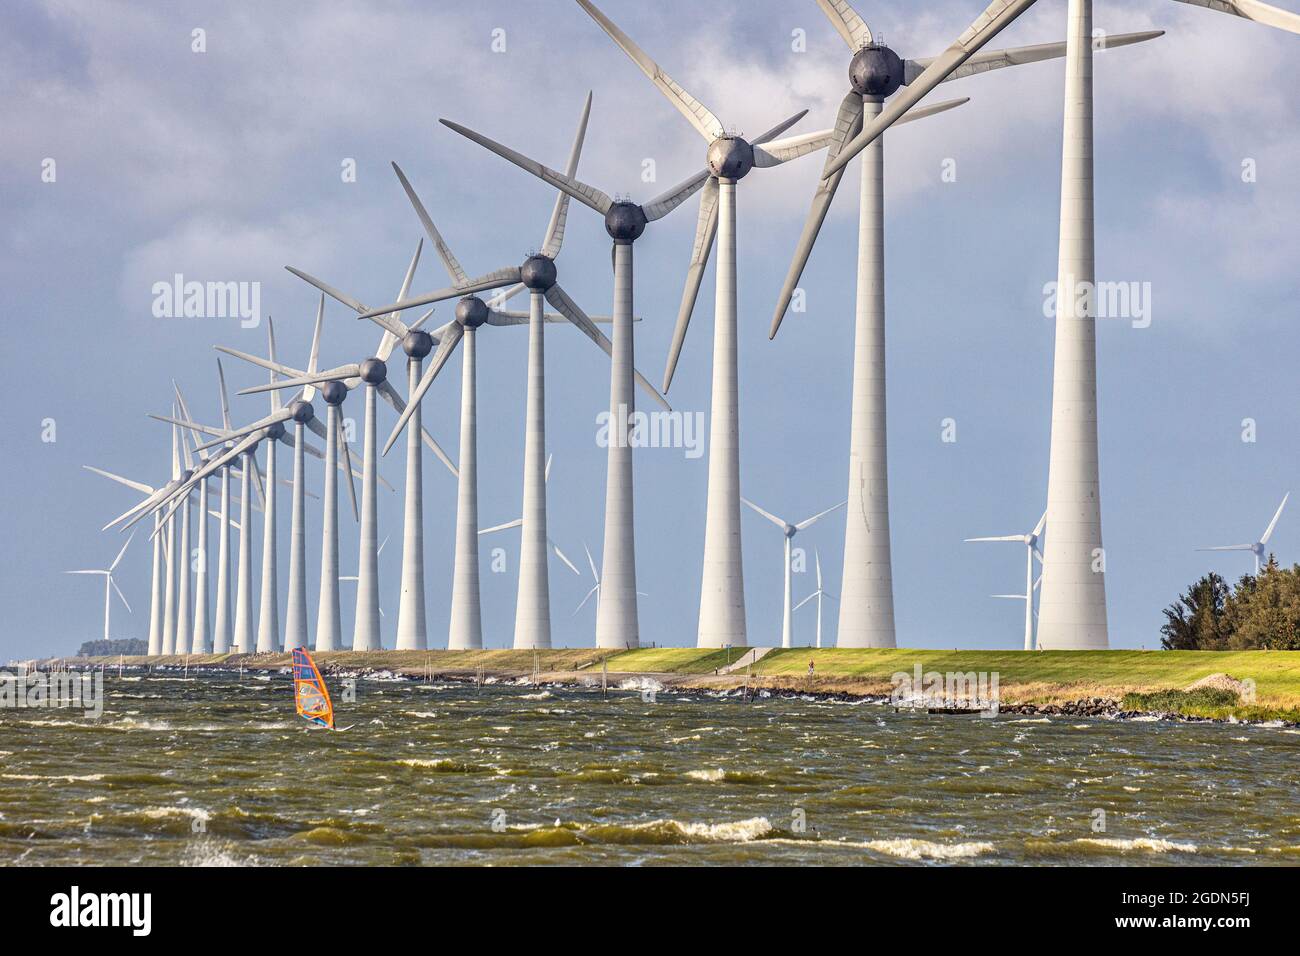 The Netherlands, Urk, Fisher village, which was an island in the Zuiderzee before it became part of the Flevo polder in 1939. Windturbines in the IJss Stock Photo